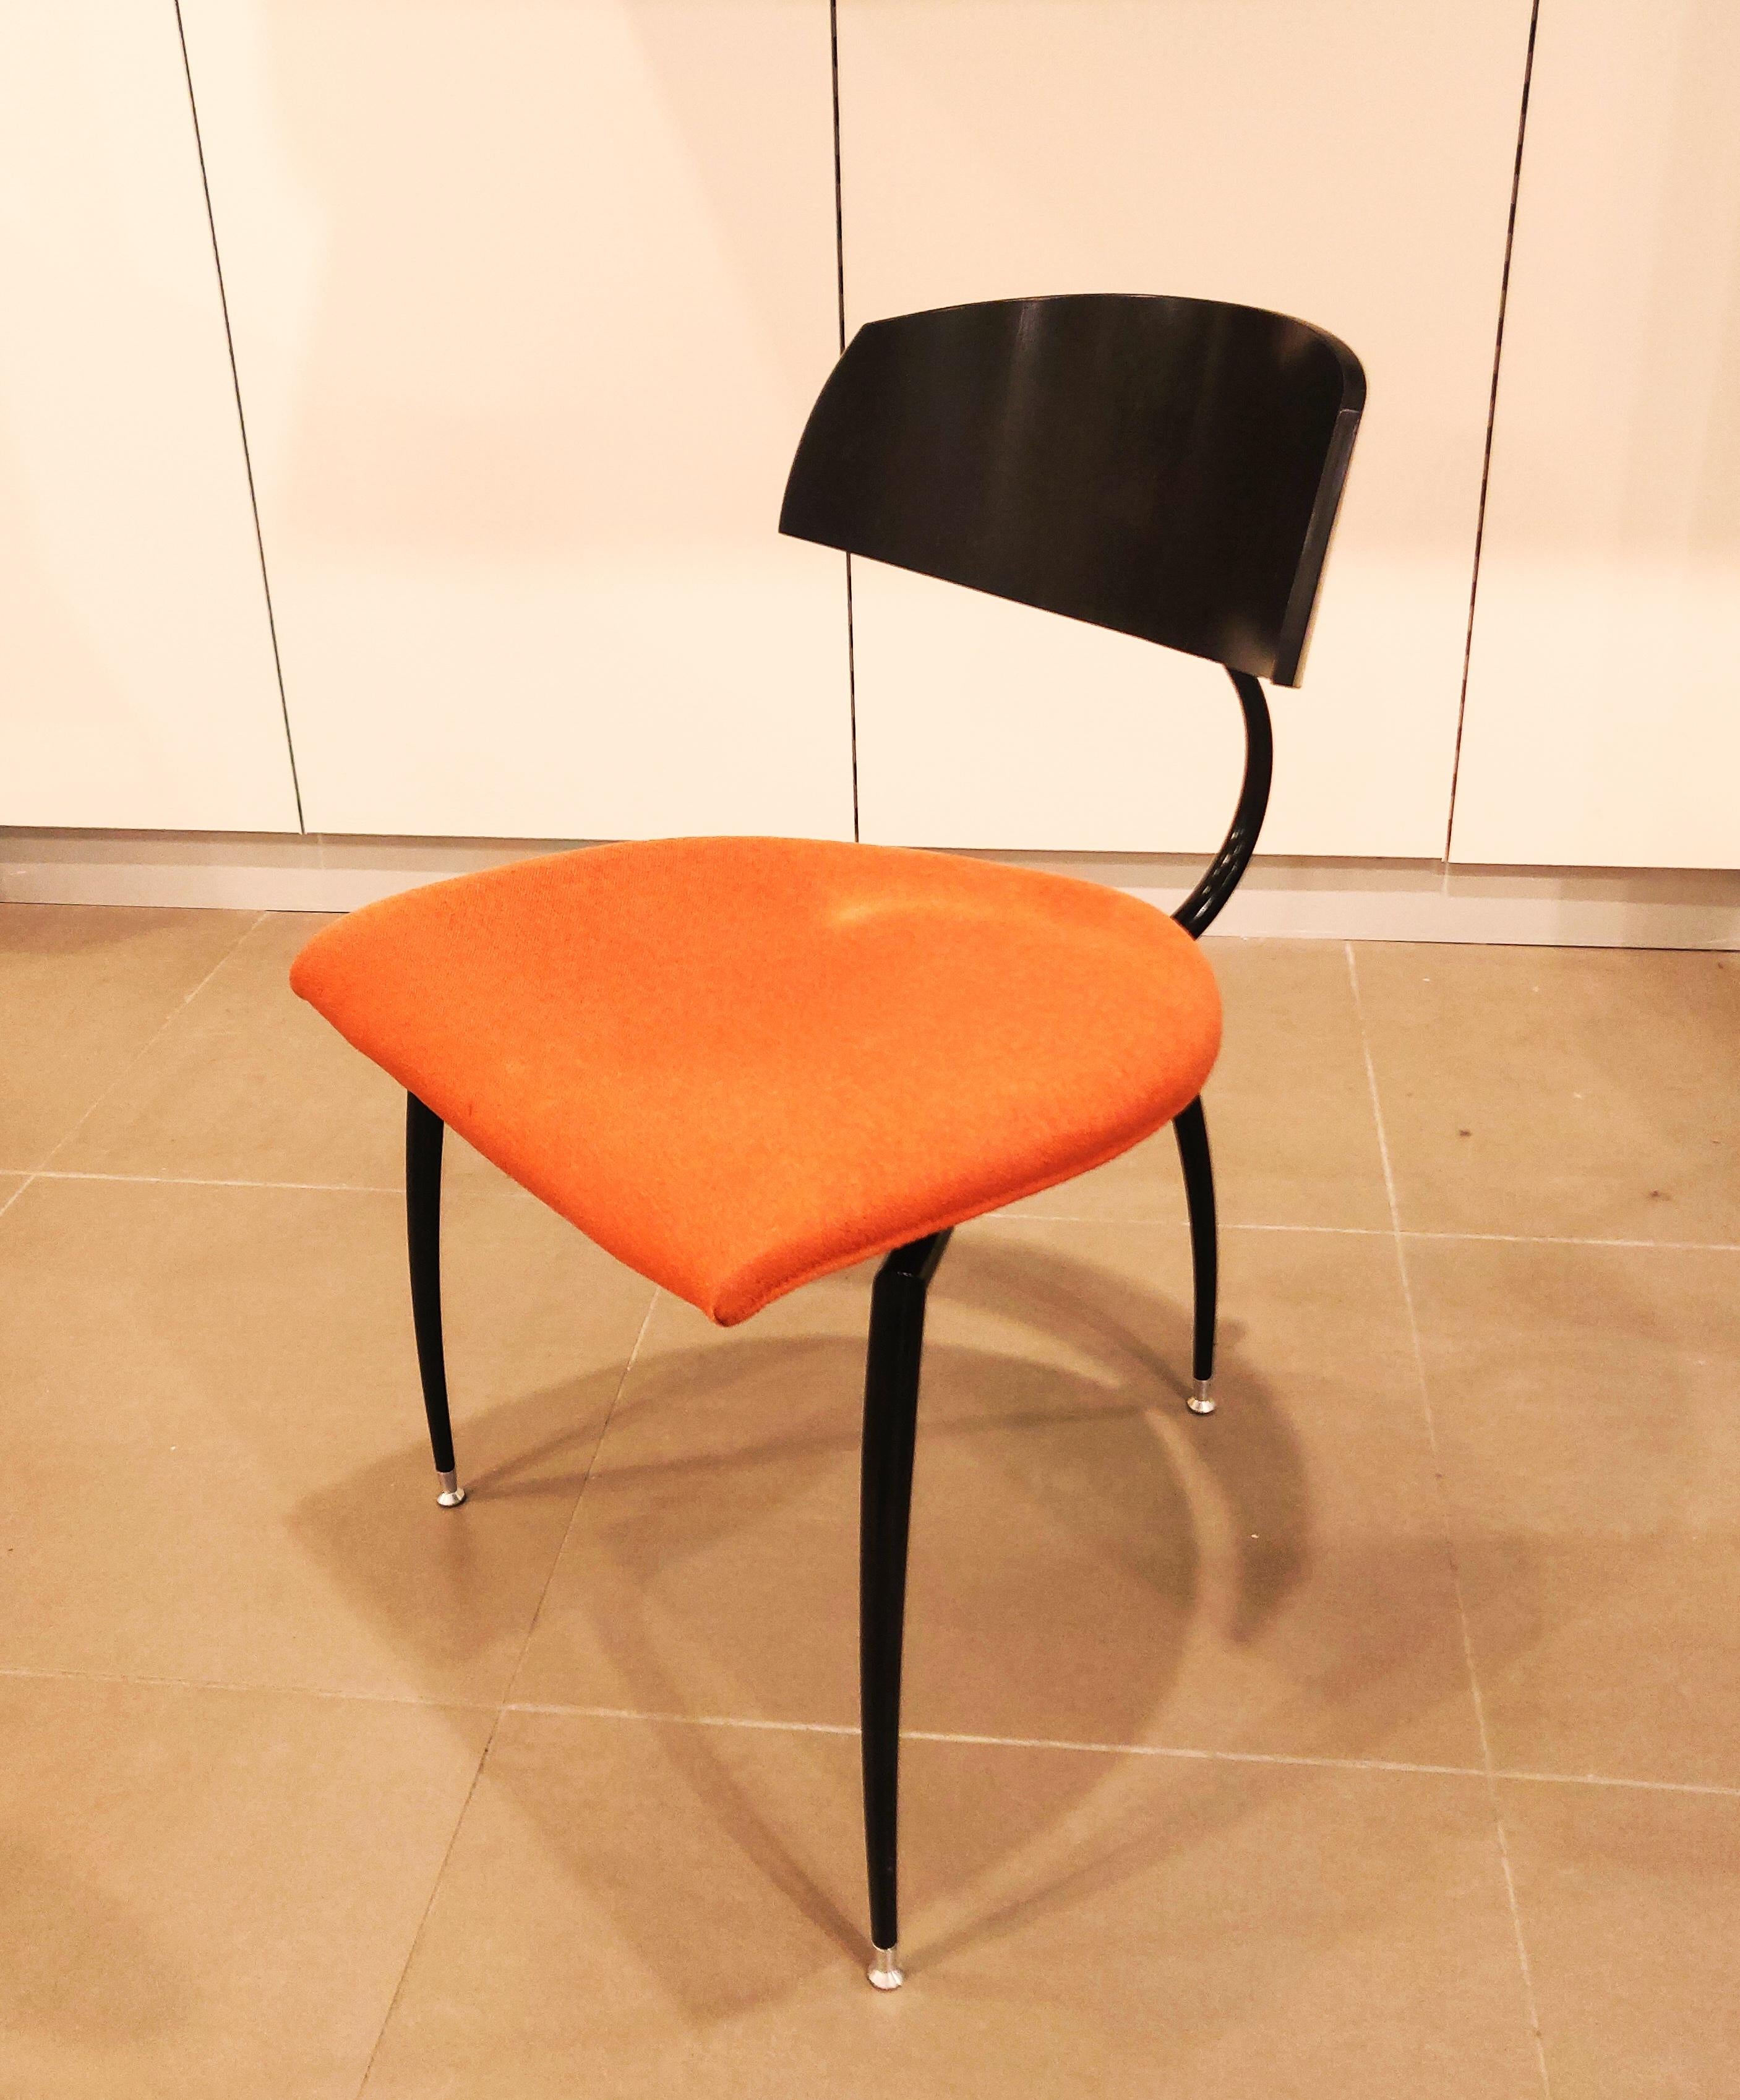 Dutch design tripod chair by Lande, 1980s. Black metal frame, floating black wooden back with aluminum connector, fabric seat. Another piece in different color seat available.